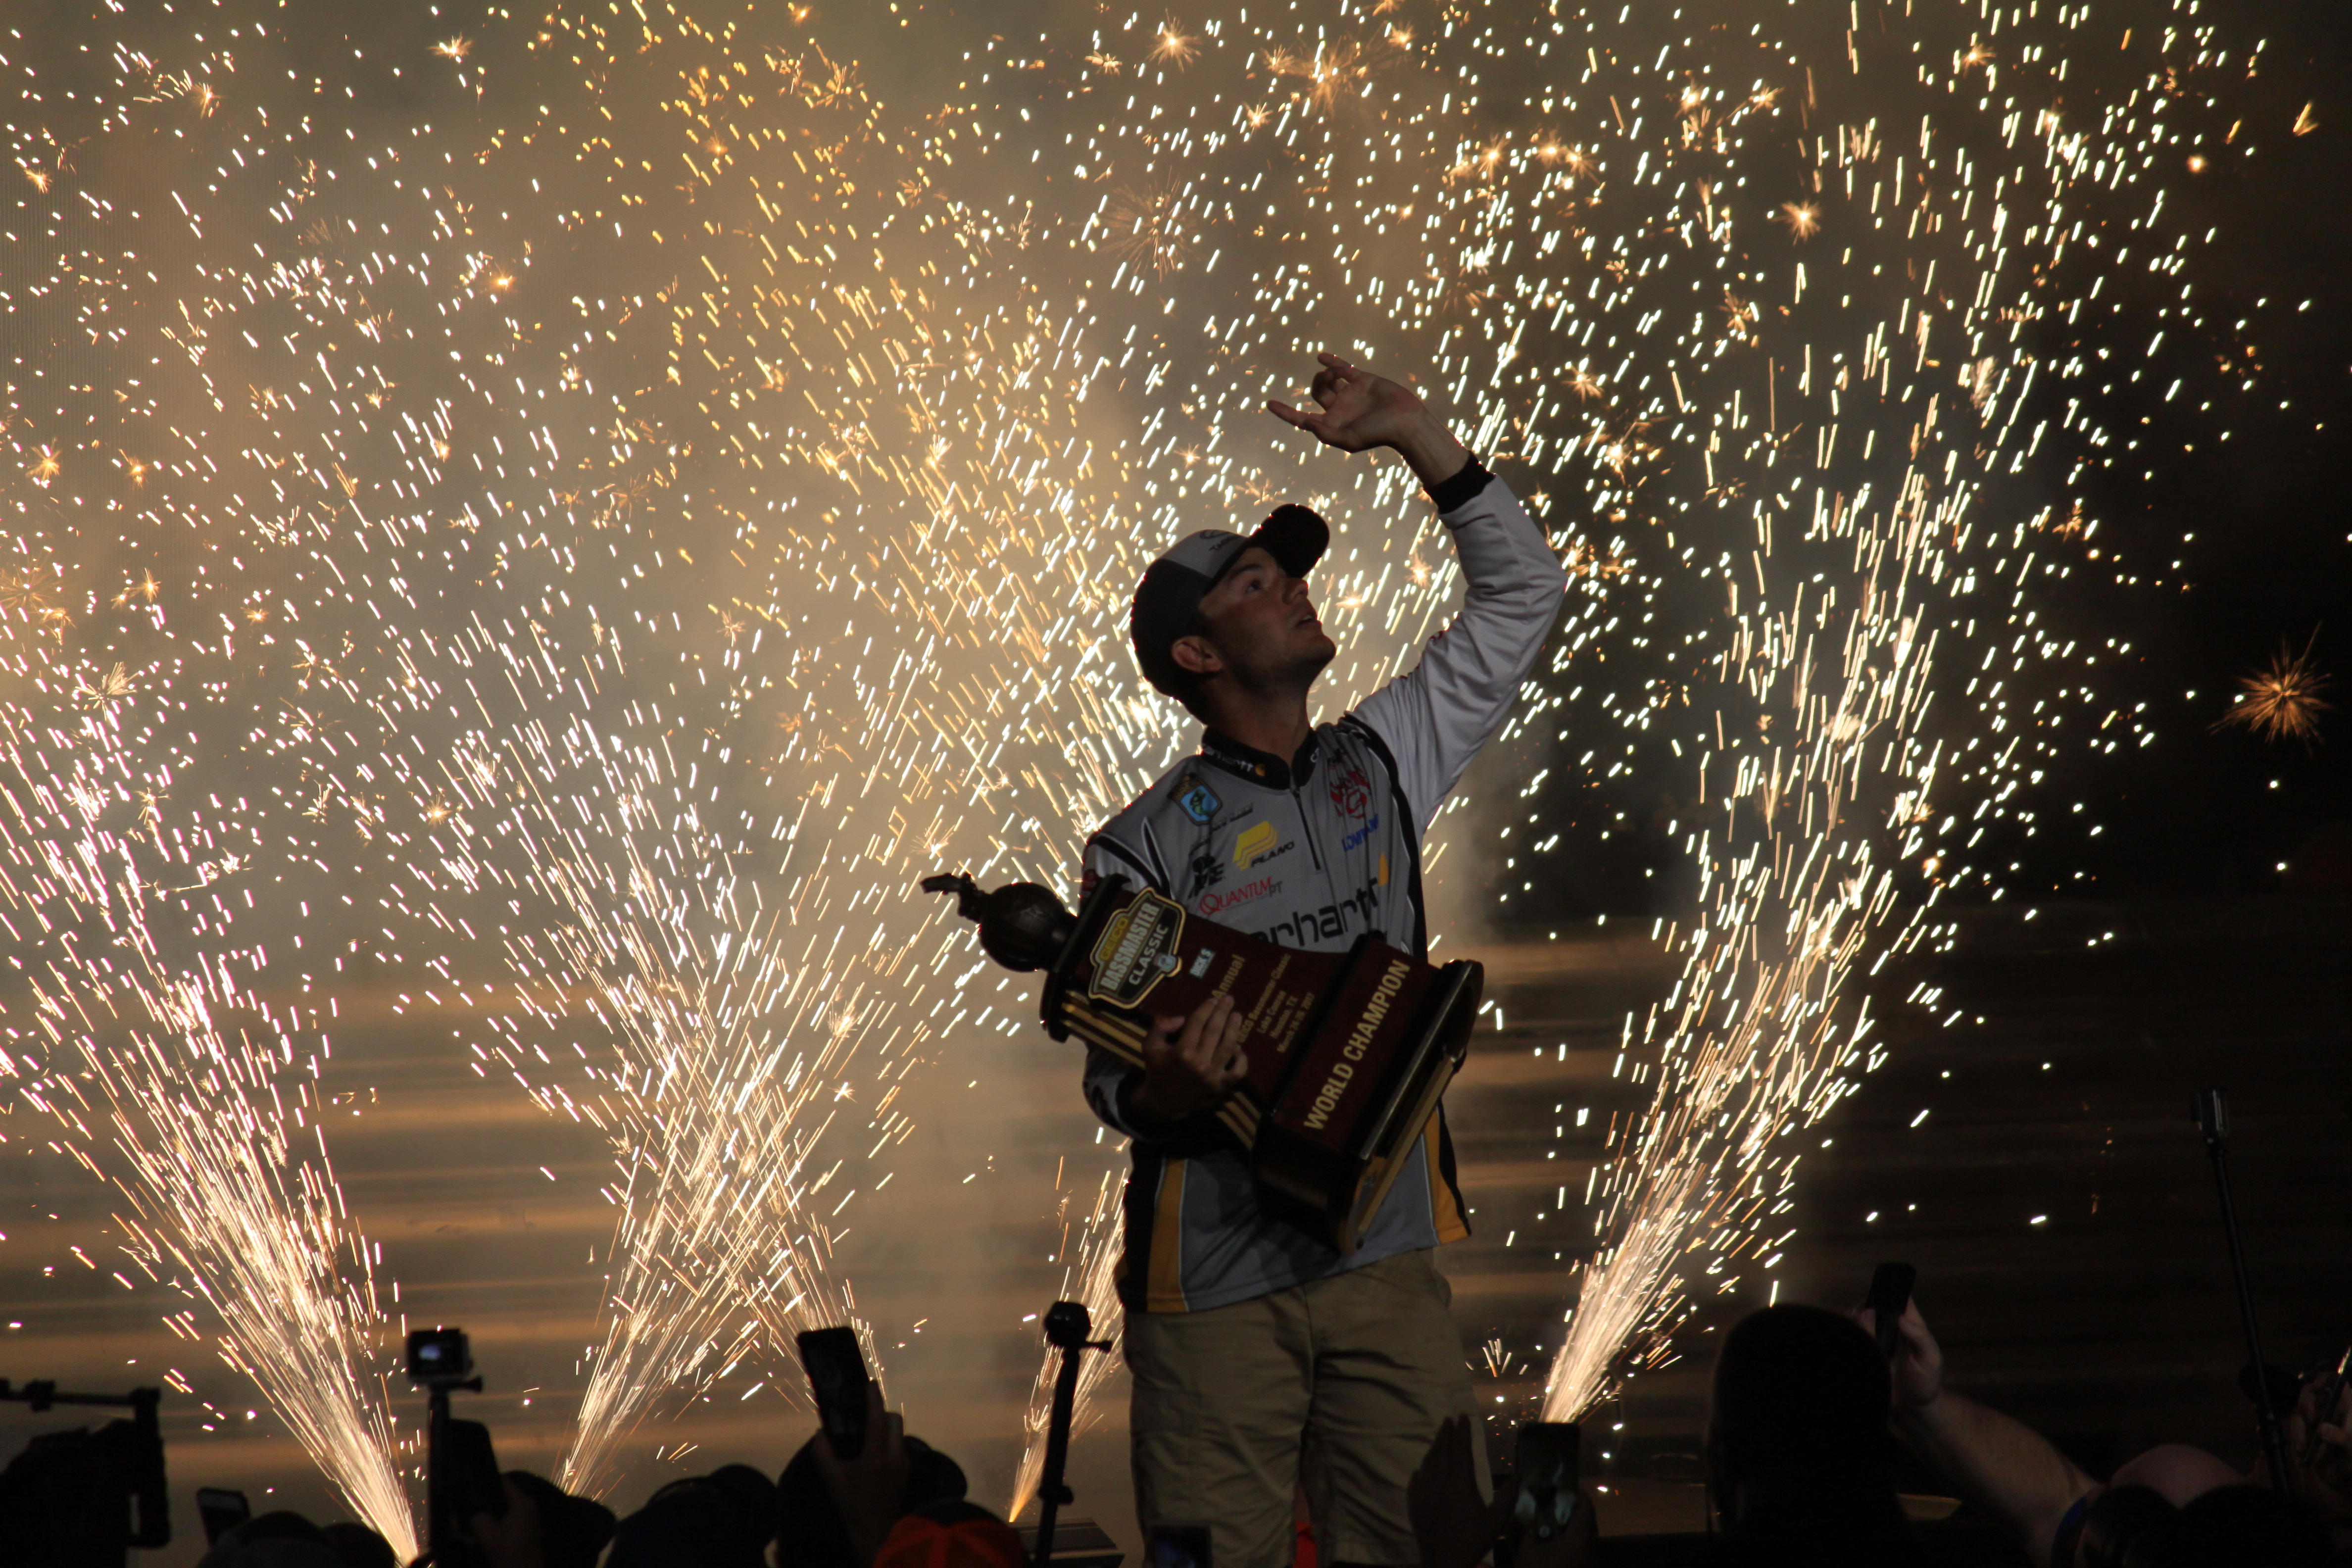 Bassmaster Classic Champion - Sparks Flying After Win.